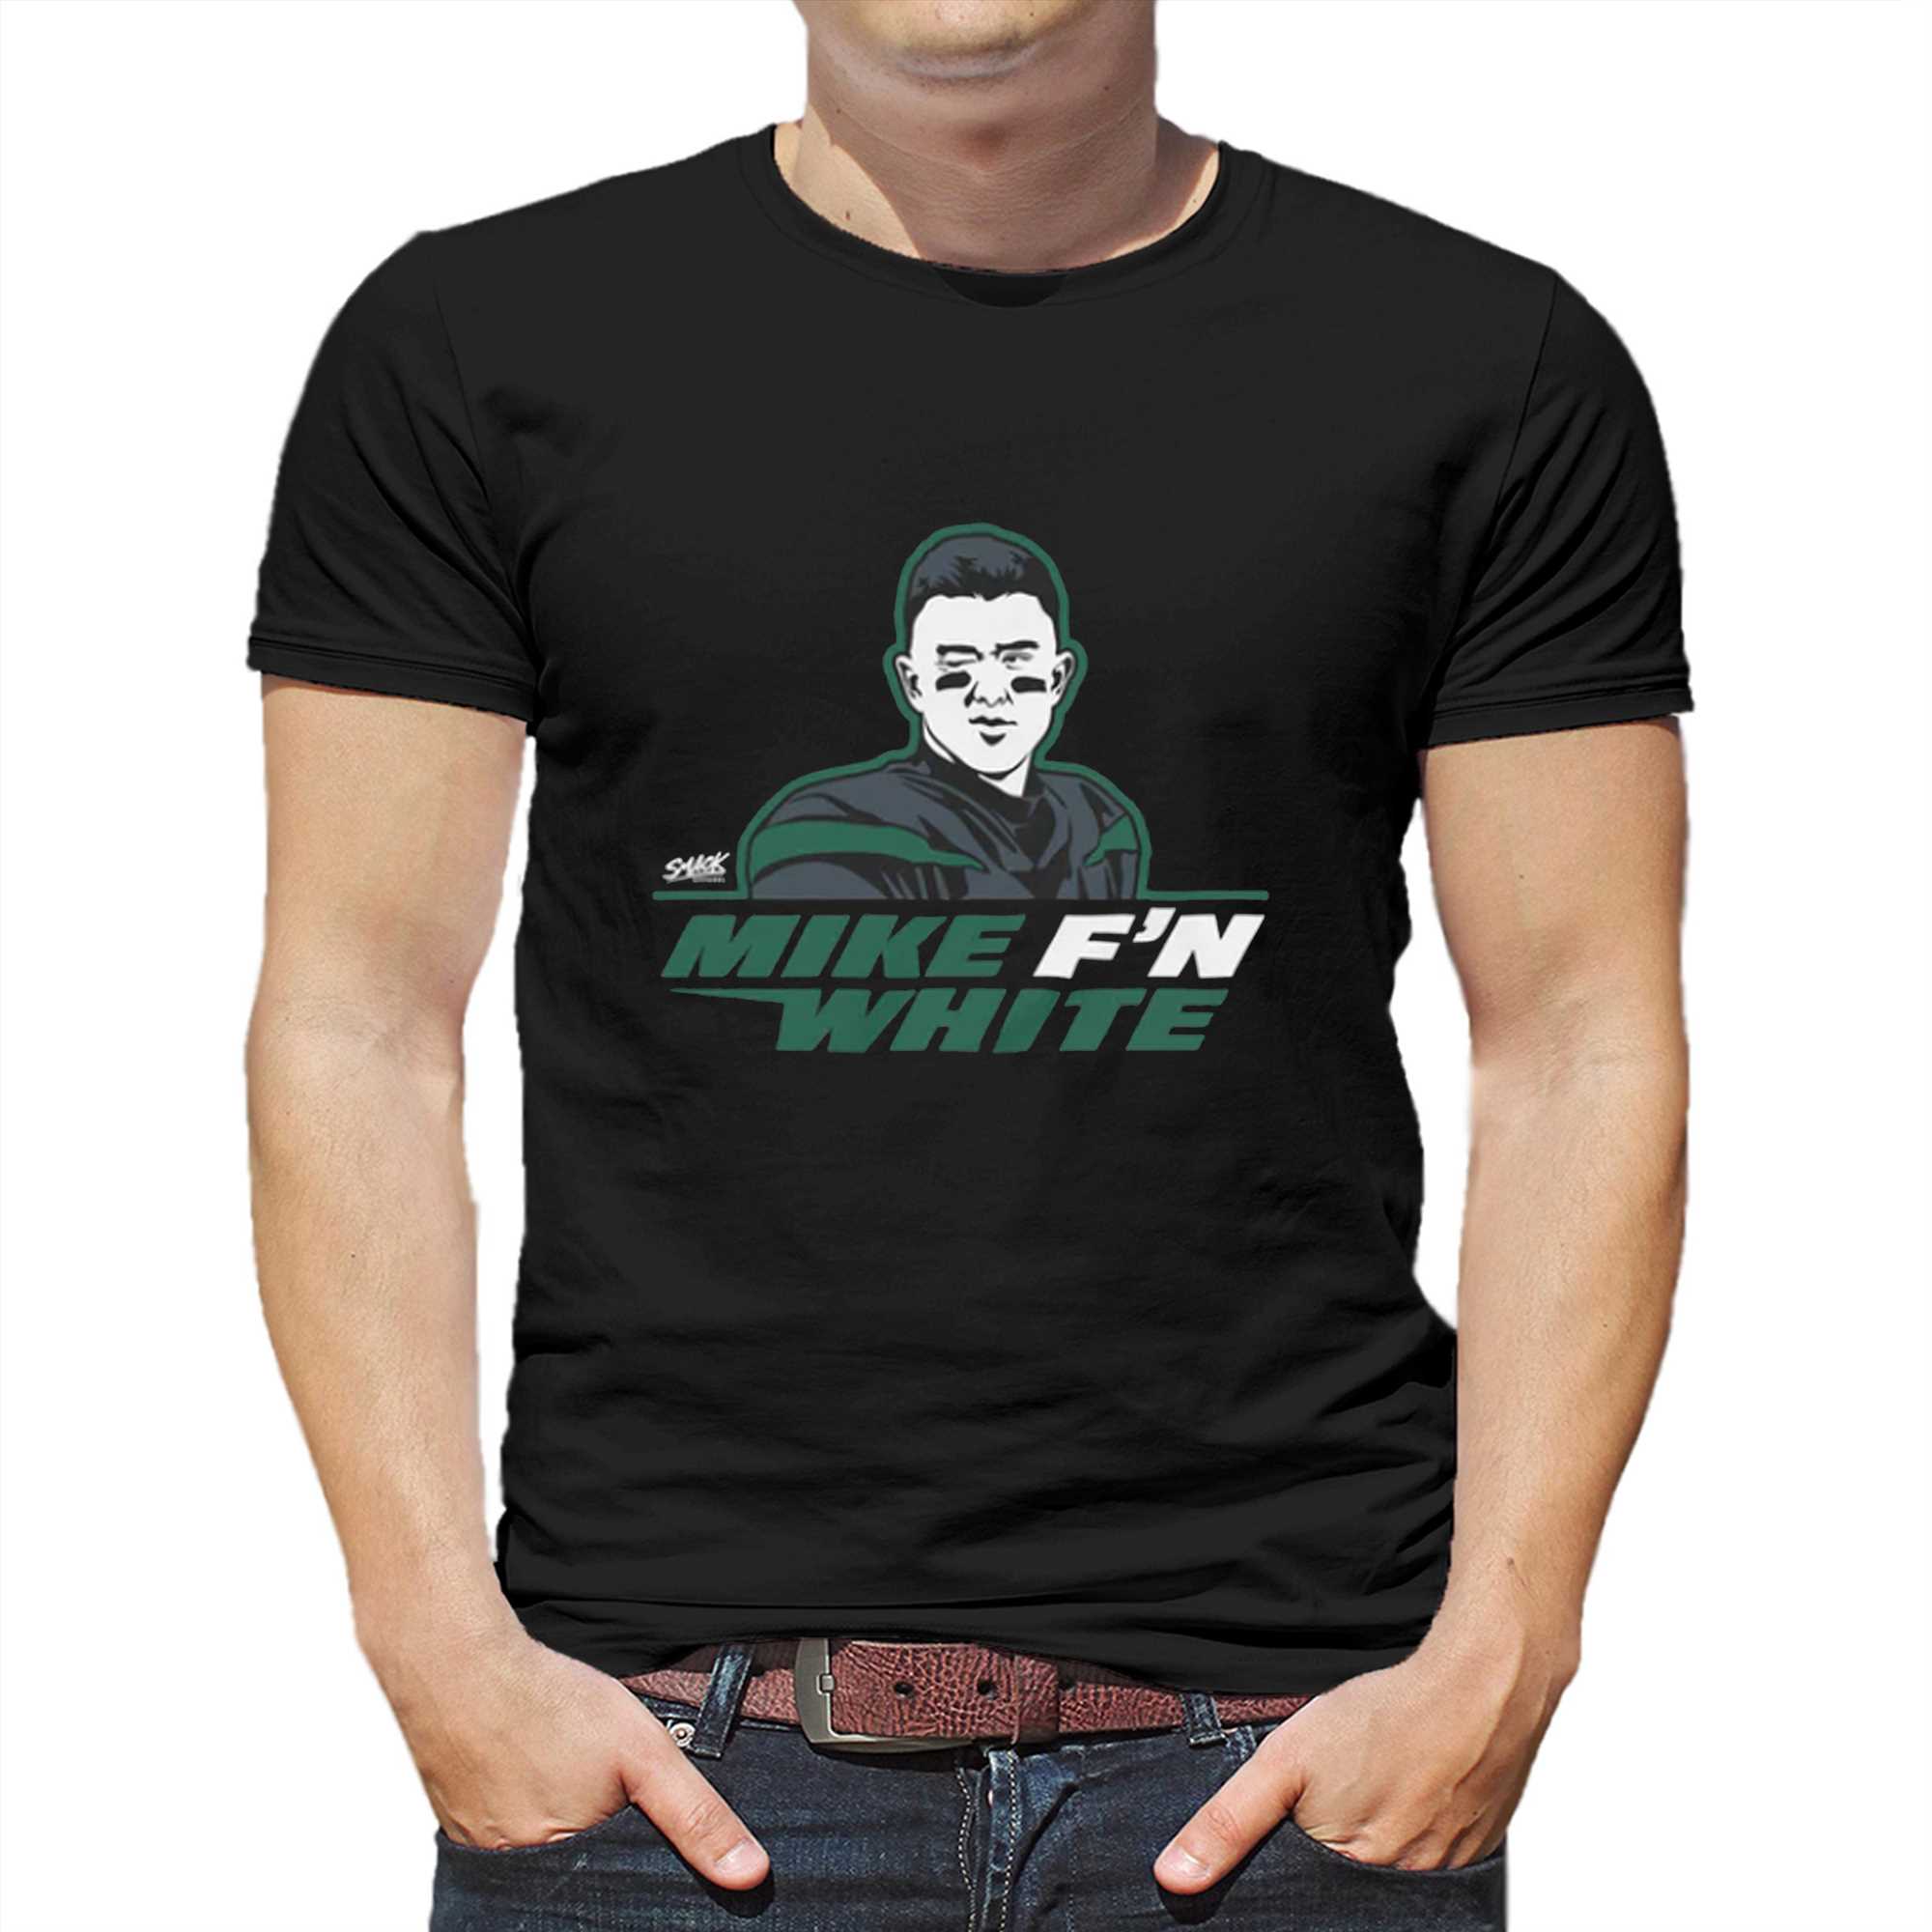 Mike F'n White T-shirt For New York Football Fans - Shibtee Clothing